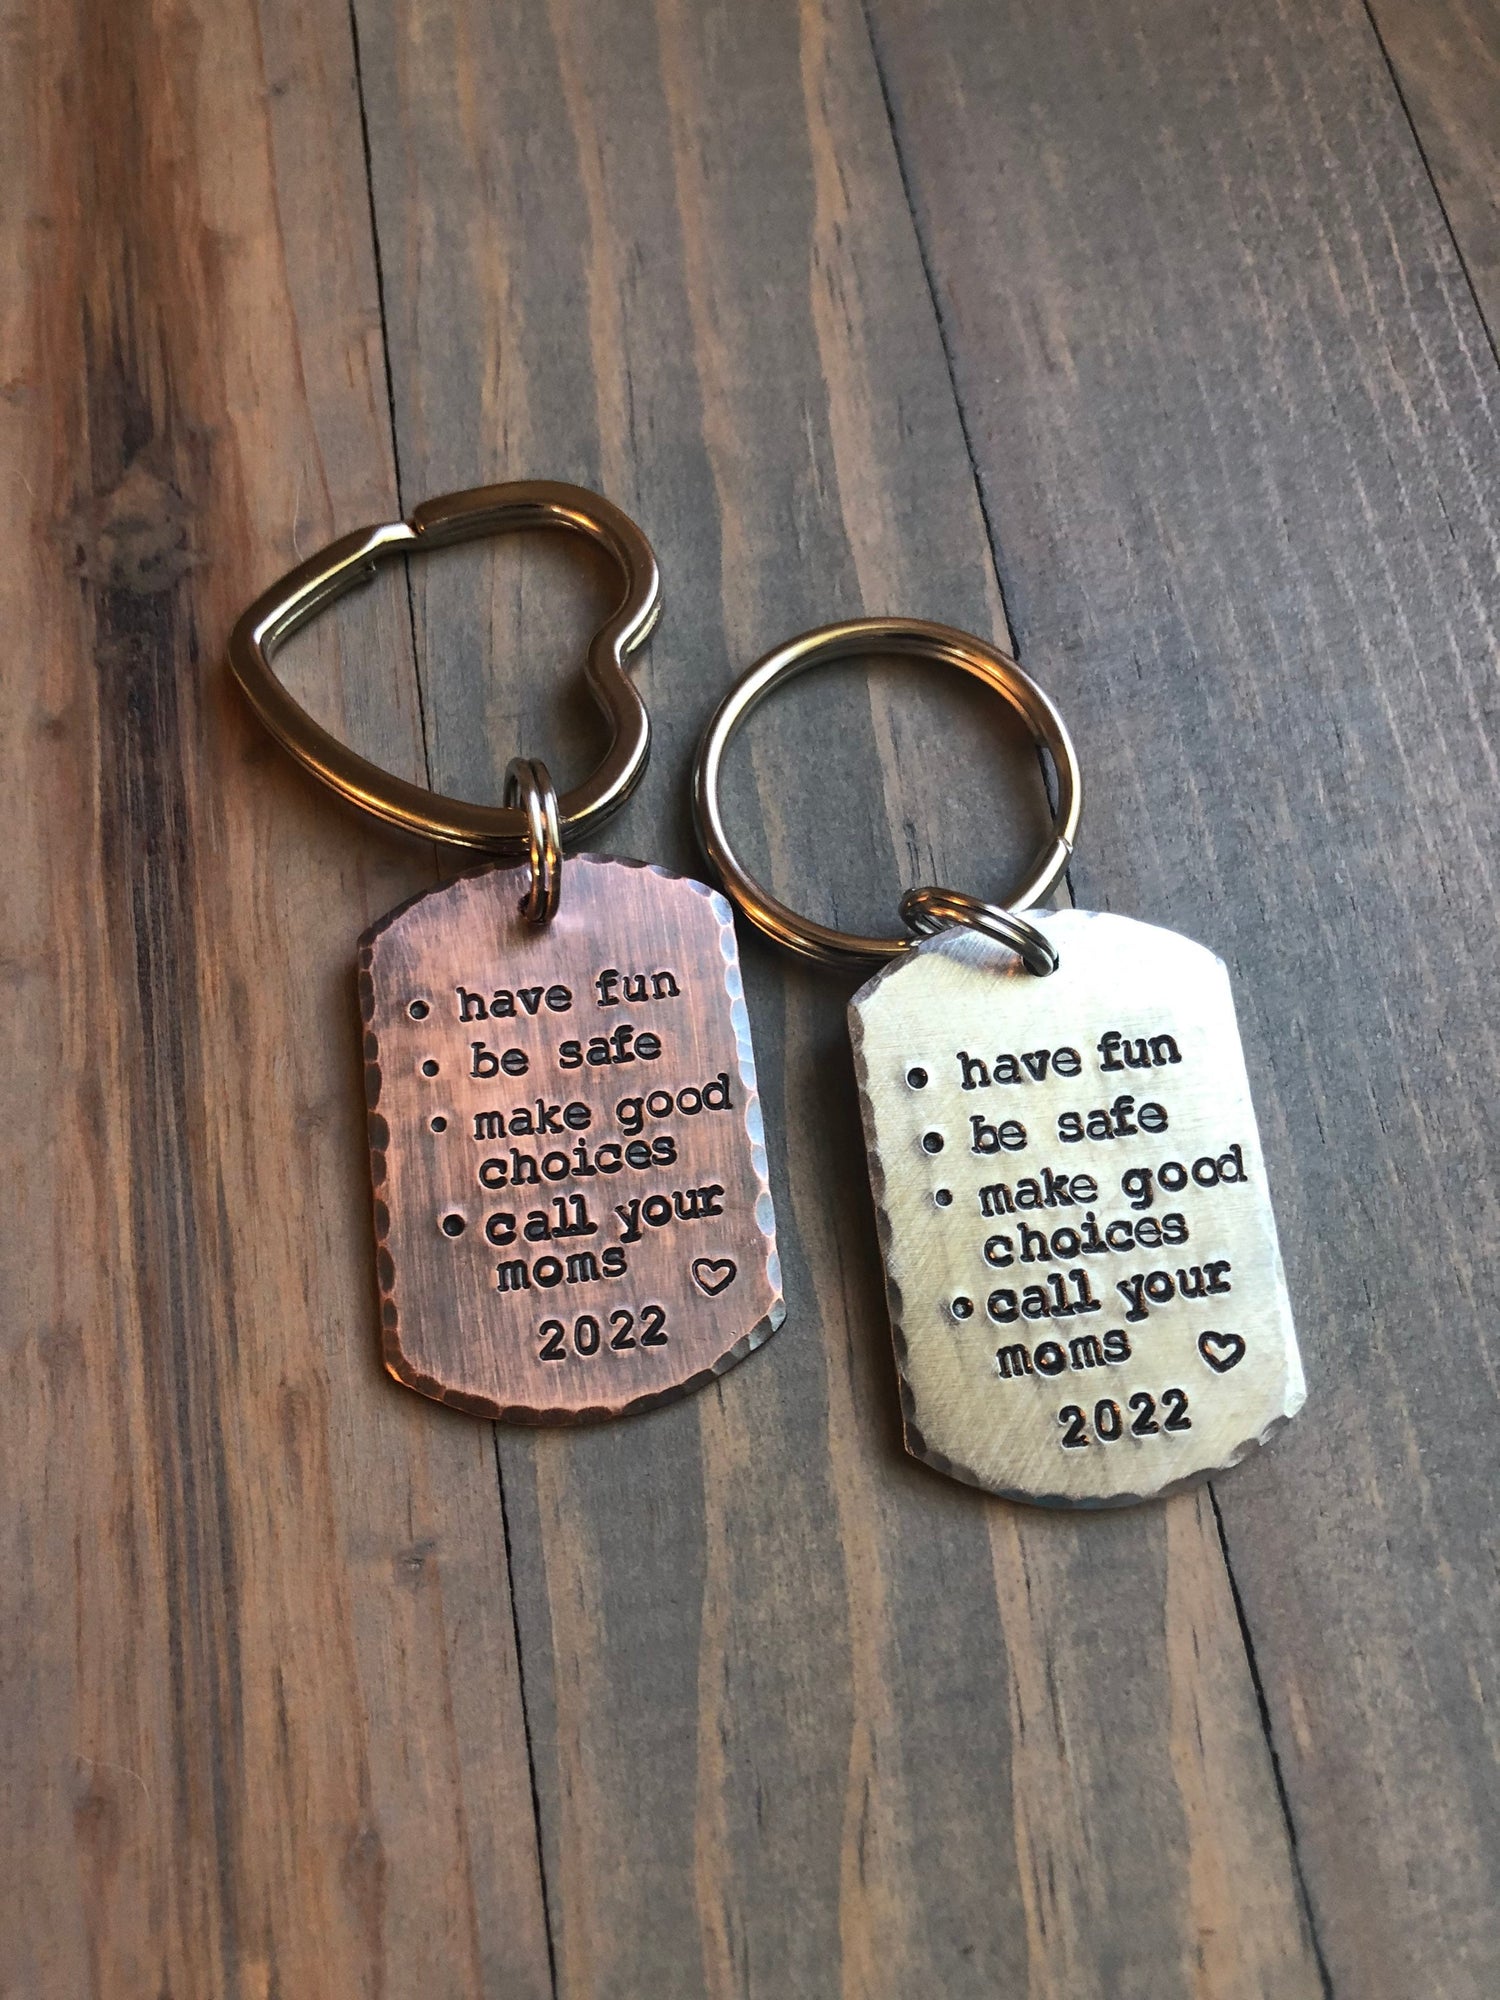 New License Gift, Make Good Choices, Gift for Teens, Call Your Mom Personalized Keychain, New Driver, Graduation Gift, Son, Daughter